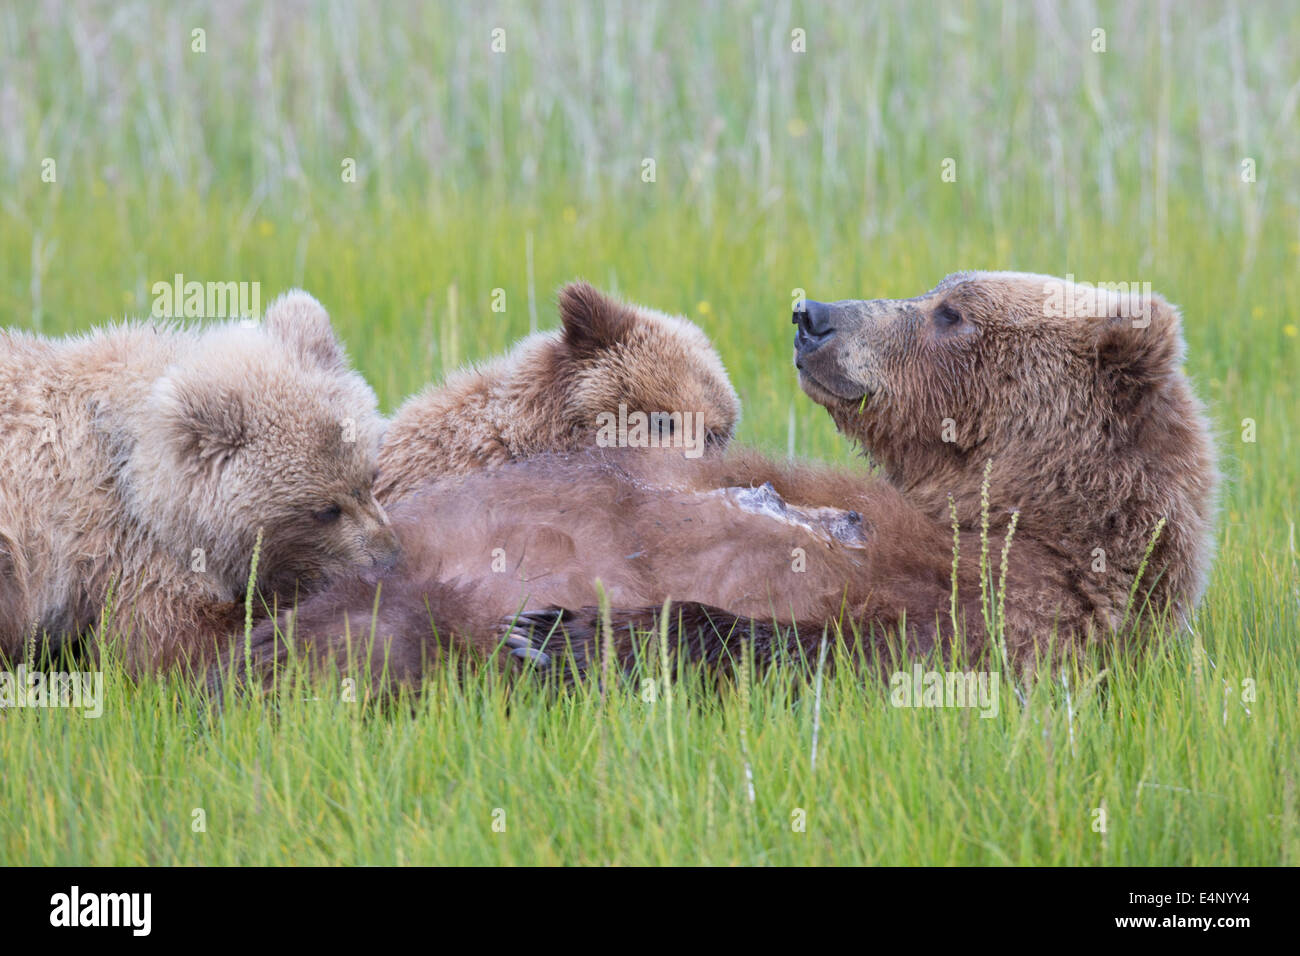 Grizzly bear cubs suckling in grassy meadow Stock Photo